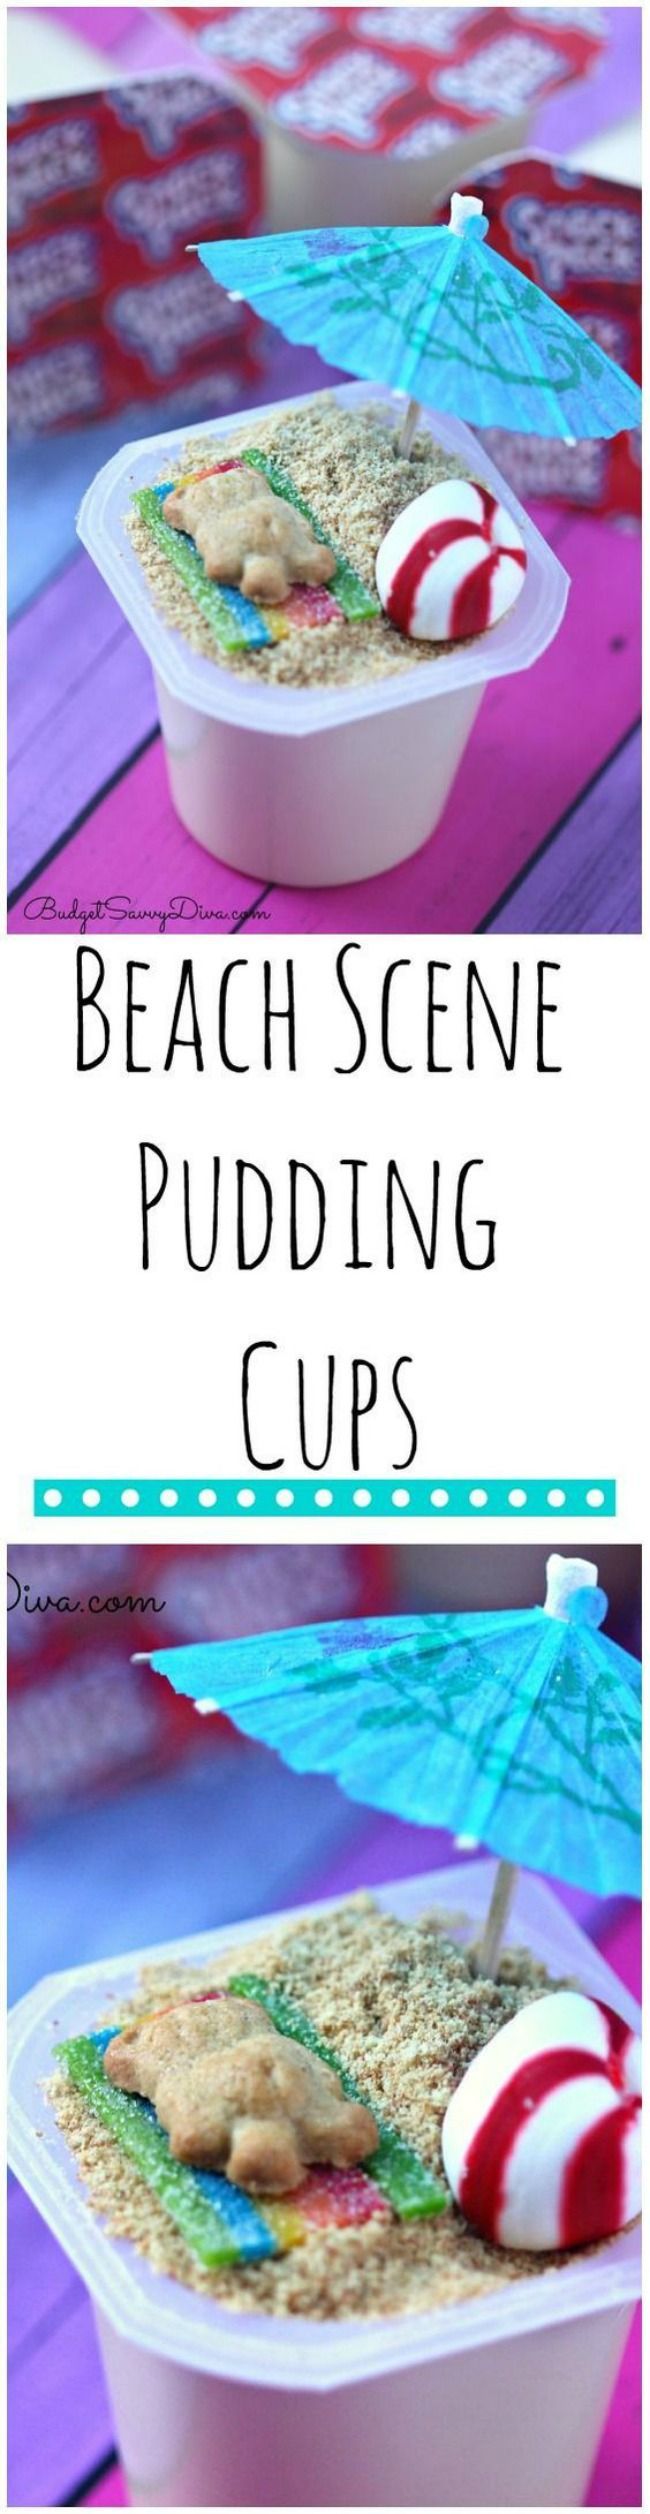 Beach Pudding Cups – perfect for a beach themed party!